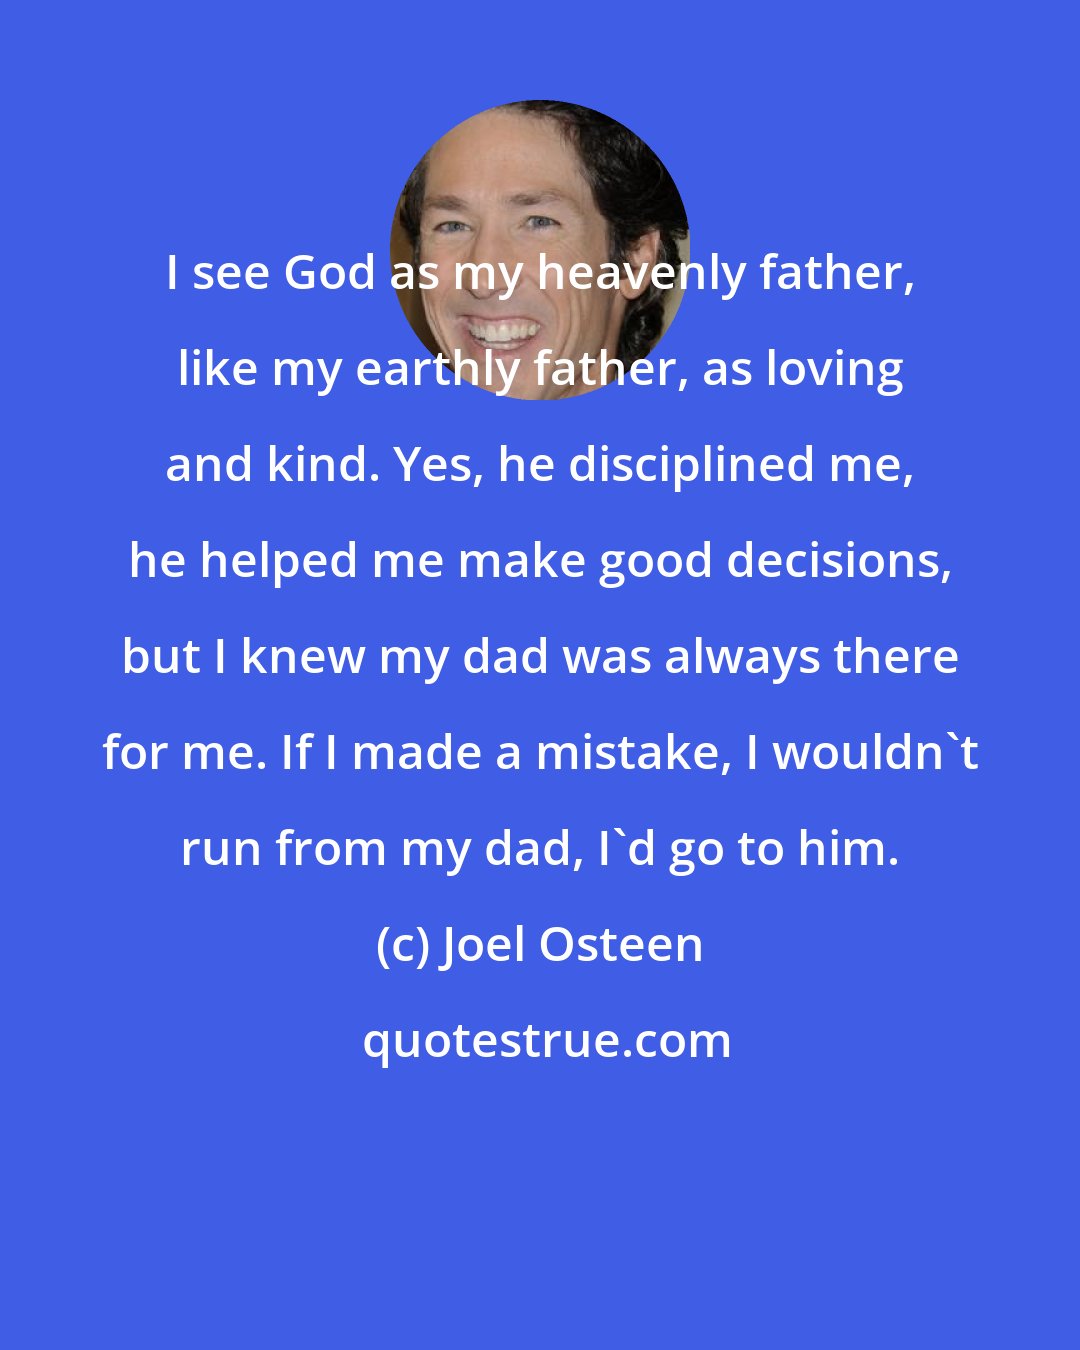 Joel Osteen: I see God as my heavenly father, like my earthly father, as loving and kind. Yes, he disciplined me, he helped me make good decisions, but I knew my dad was always there for me. If I made a mistake, I wouldn't run from my dad, I'd go to him.